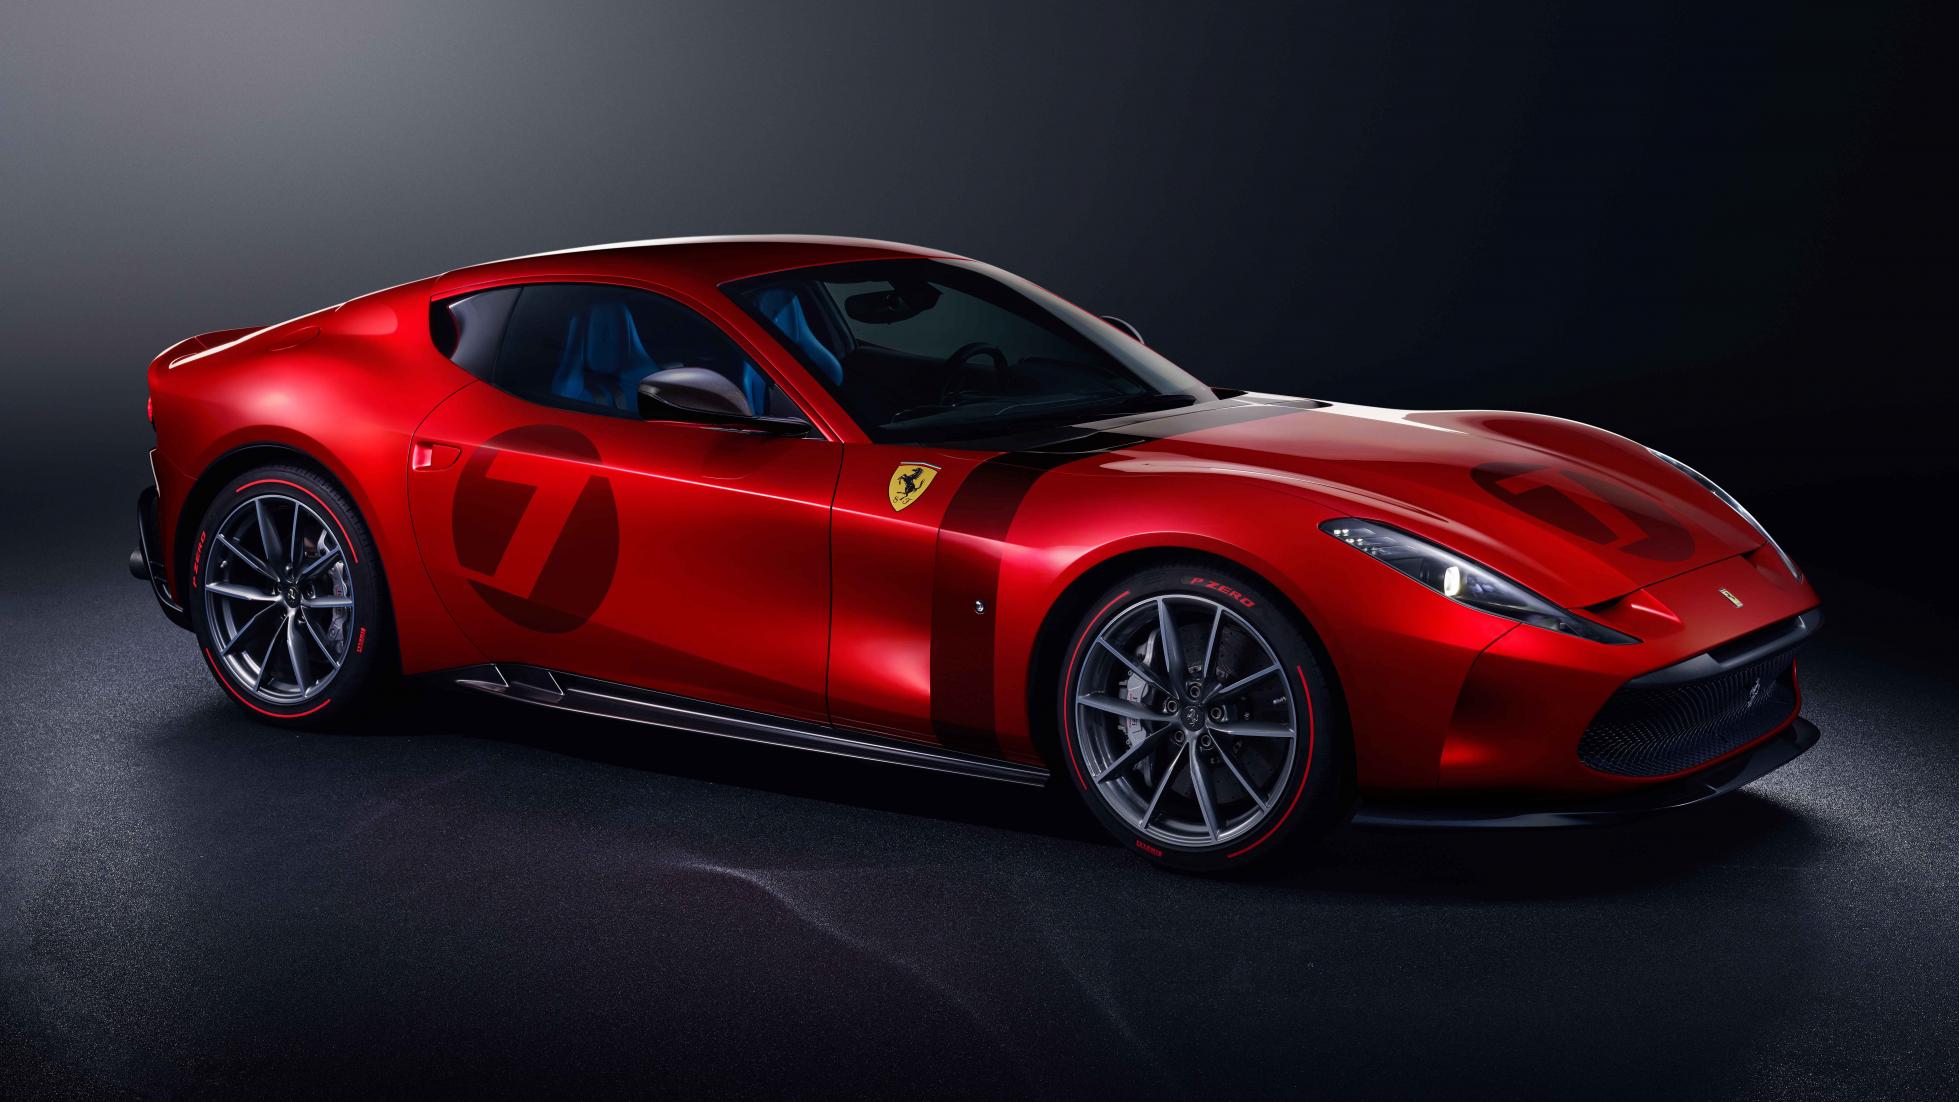 The Ferrari Omologata is a one-off, rebodied 812 Superfast